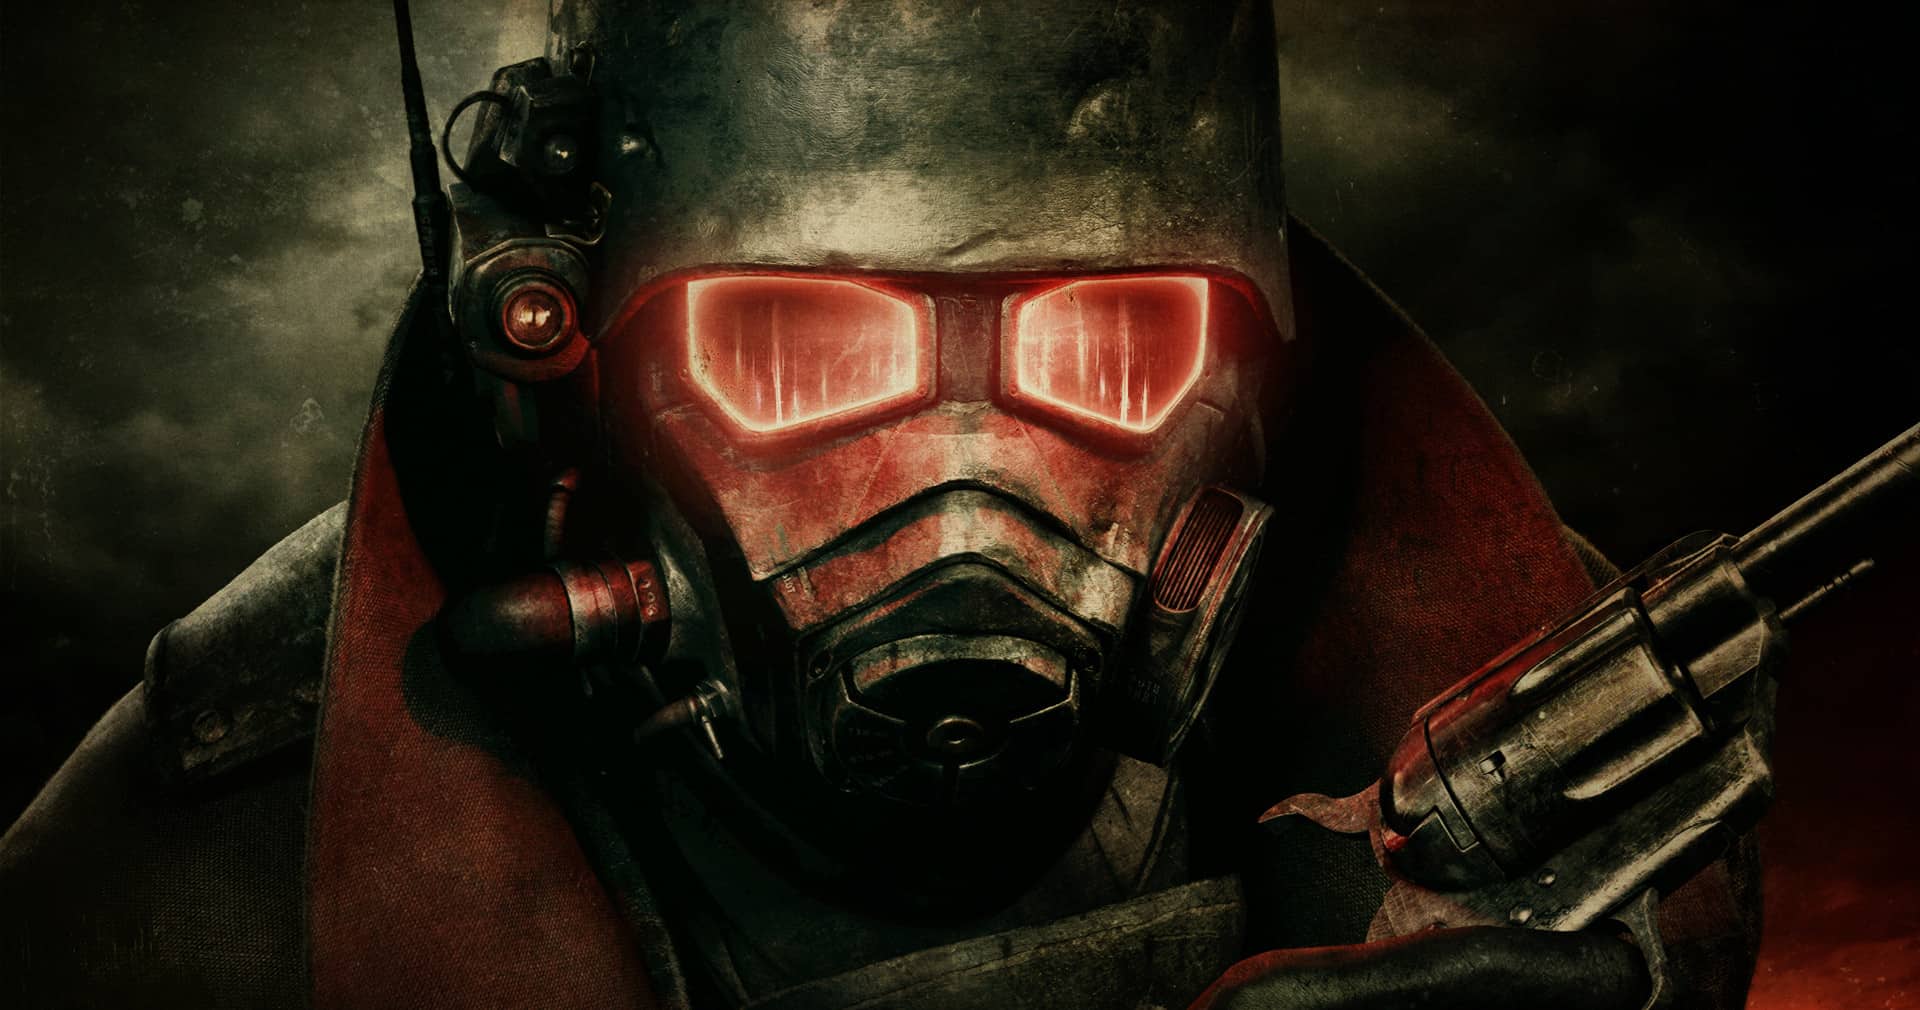 A promotional image of a character in NCR Ranger armor from Fallout: New Vegas